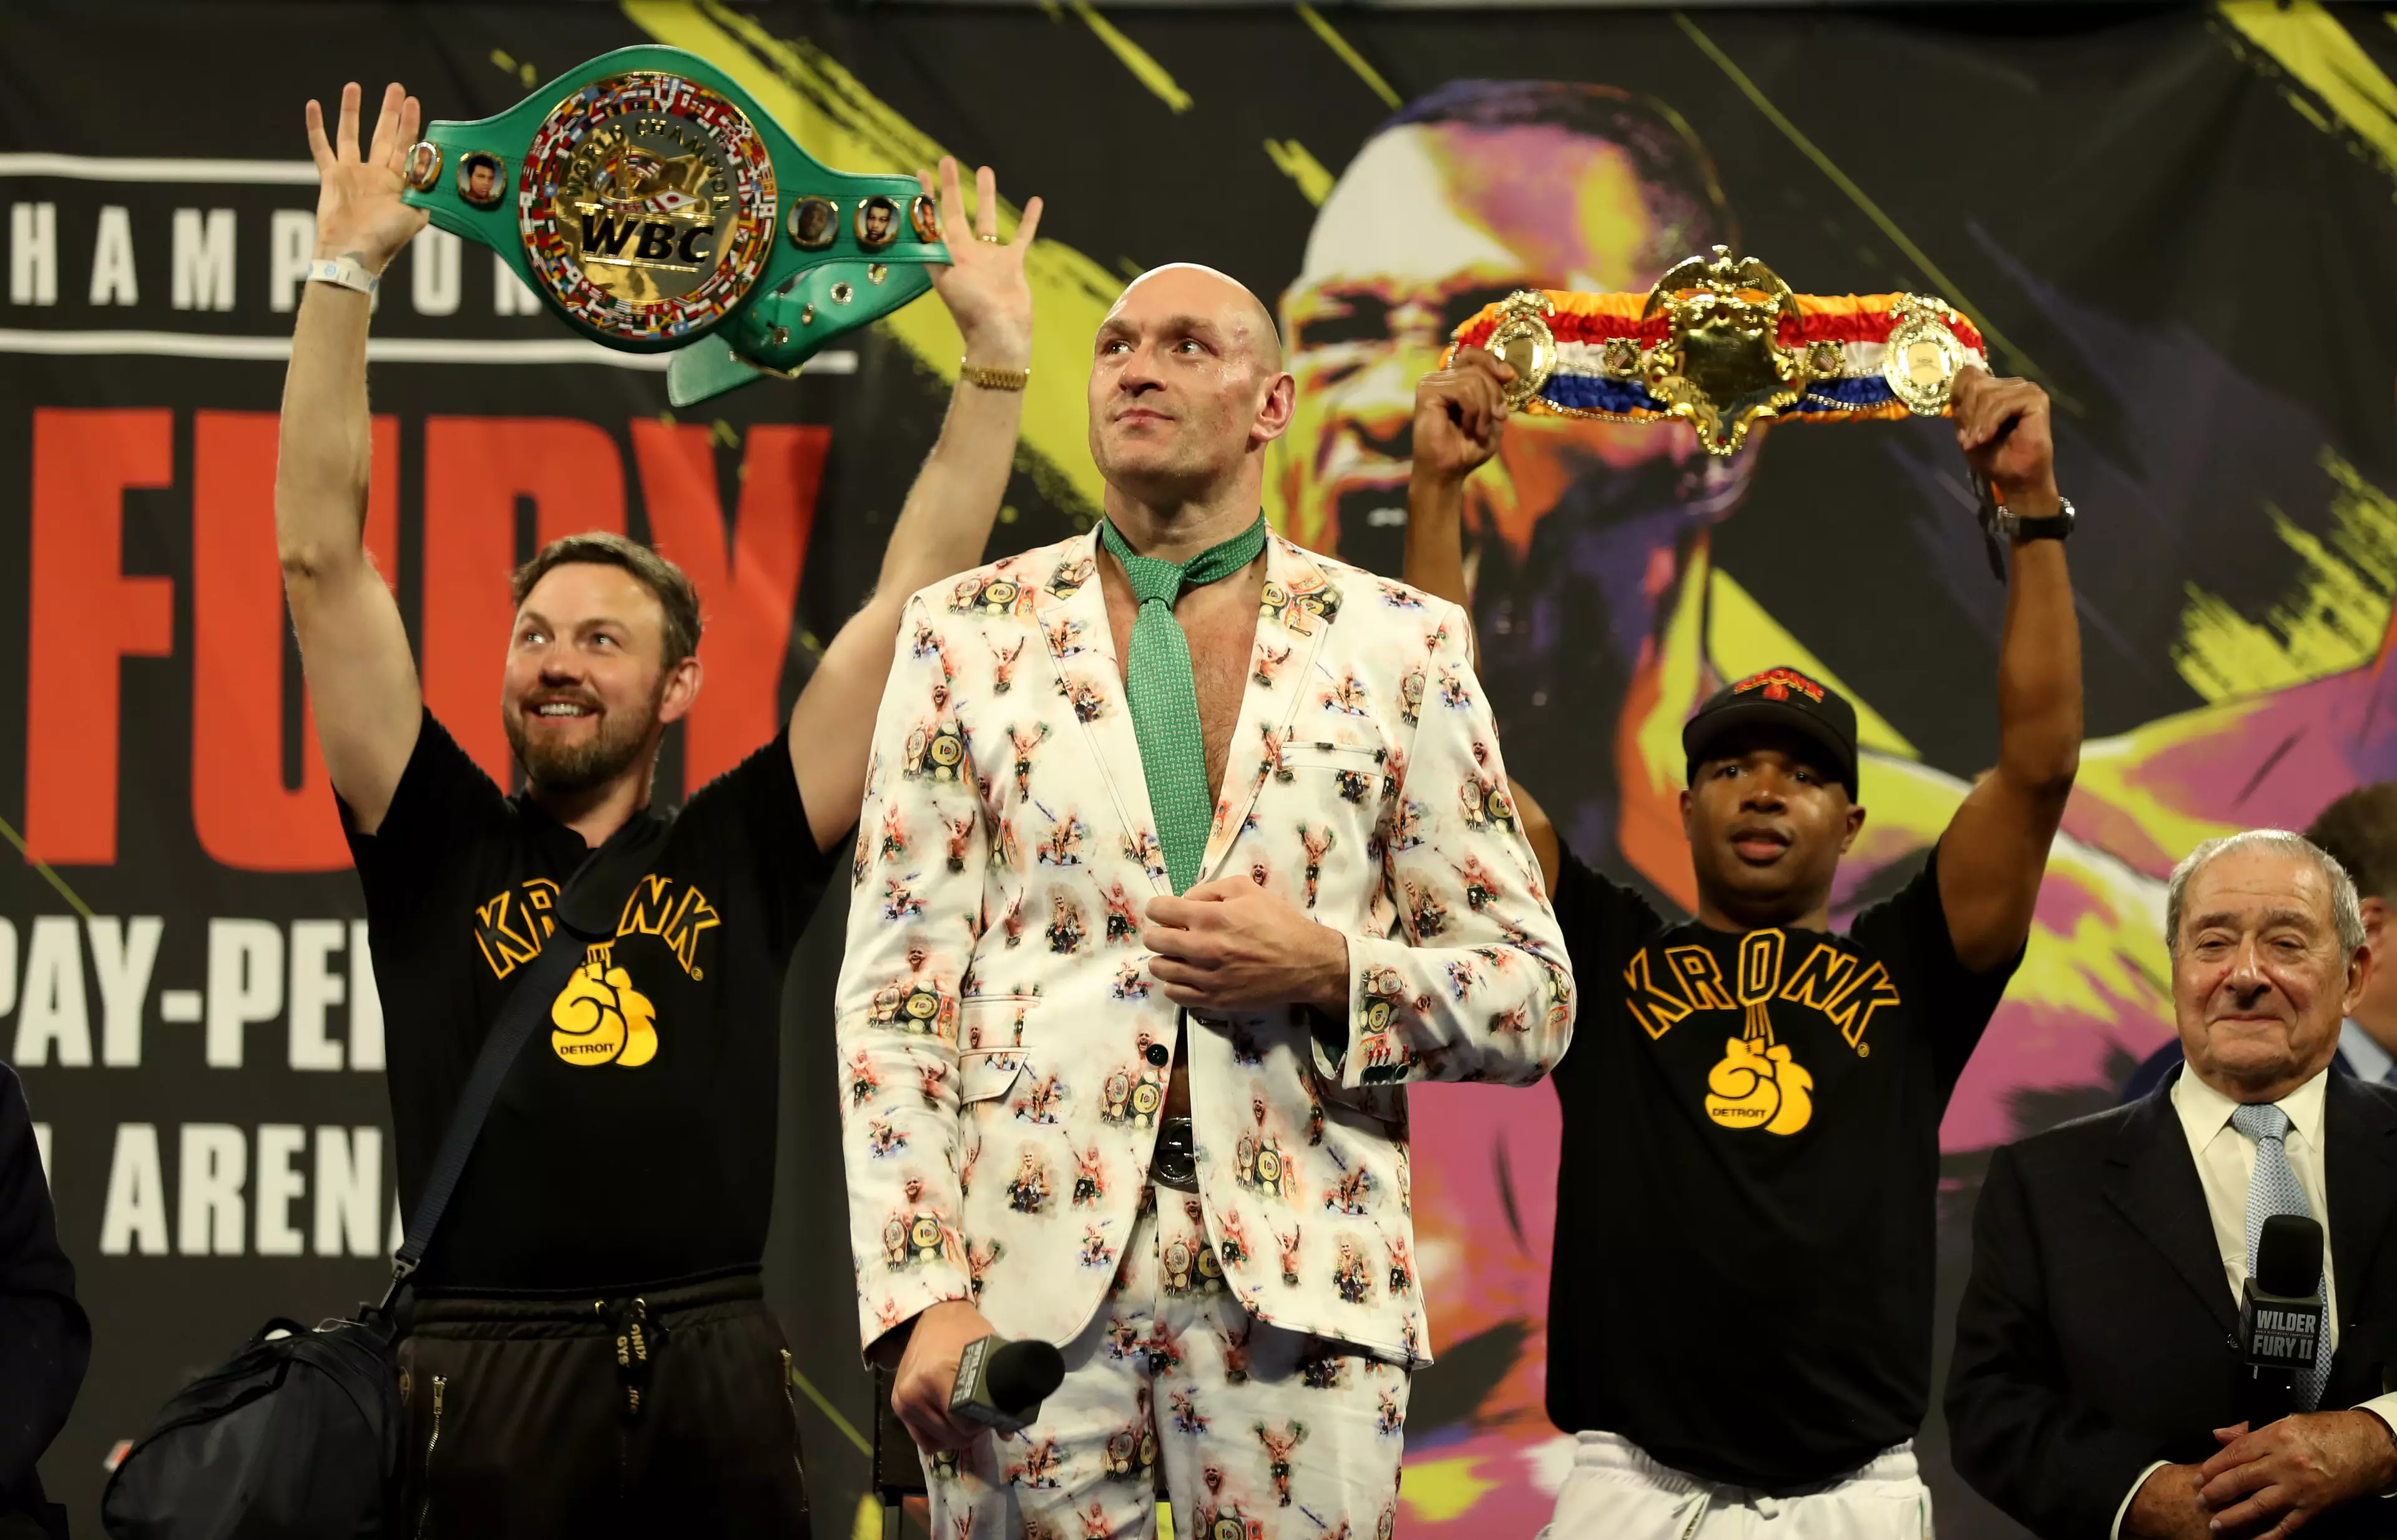 Tyson Fury emphatically stopped hard-hitting Deontay Wilder back in February 2020 to claim the WBC and Ring Magazine titles